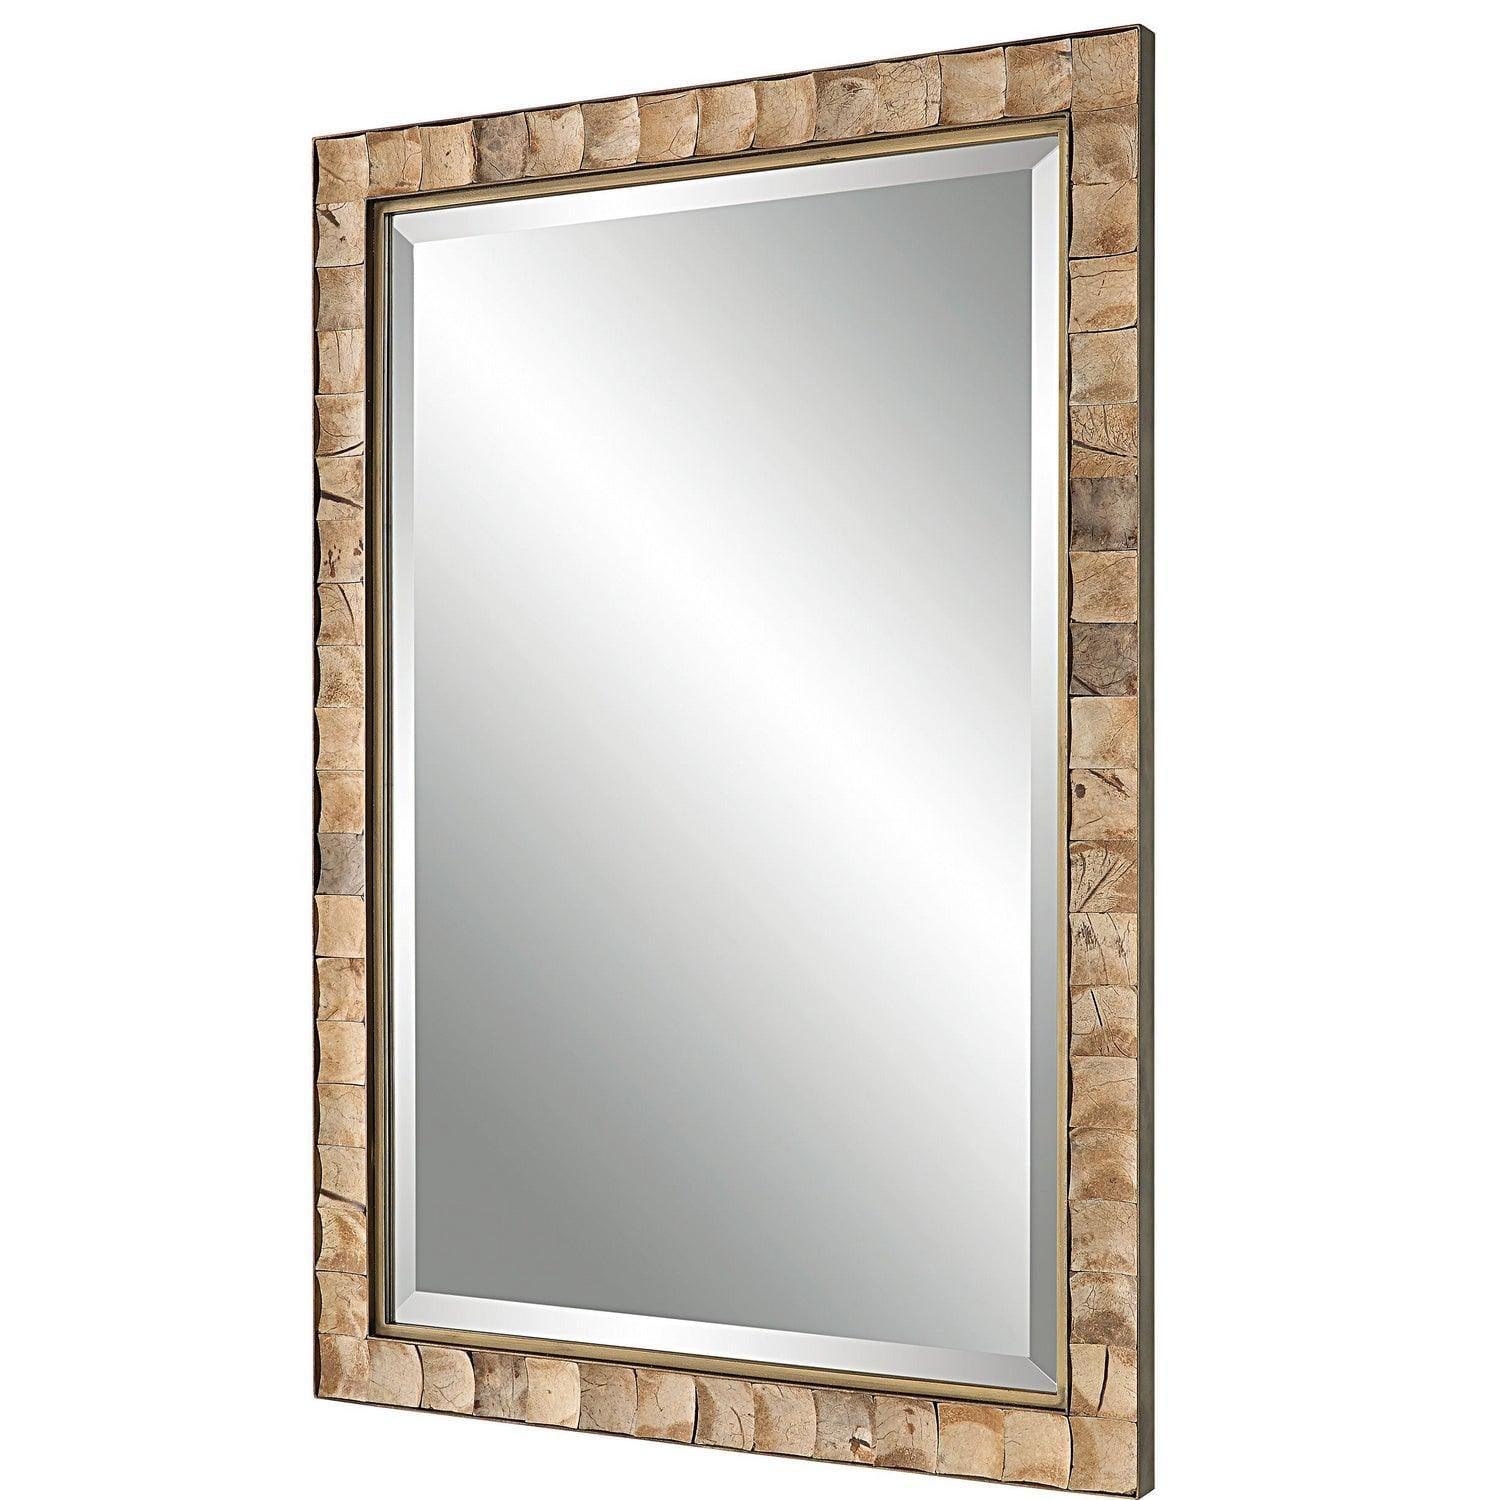 The Uttermost - Cocos Mirror - 09751 | Montreal Lighting & Hardware